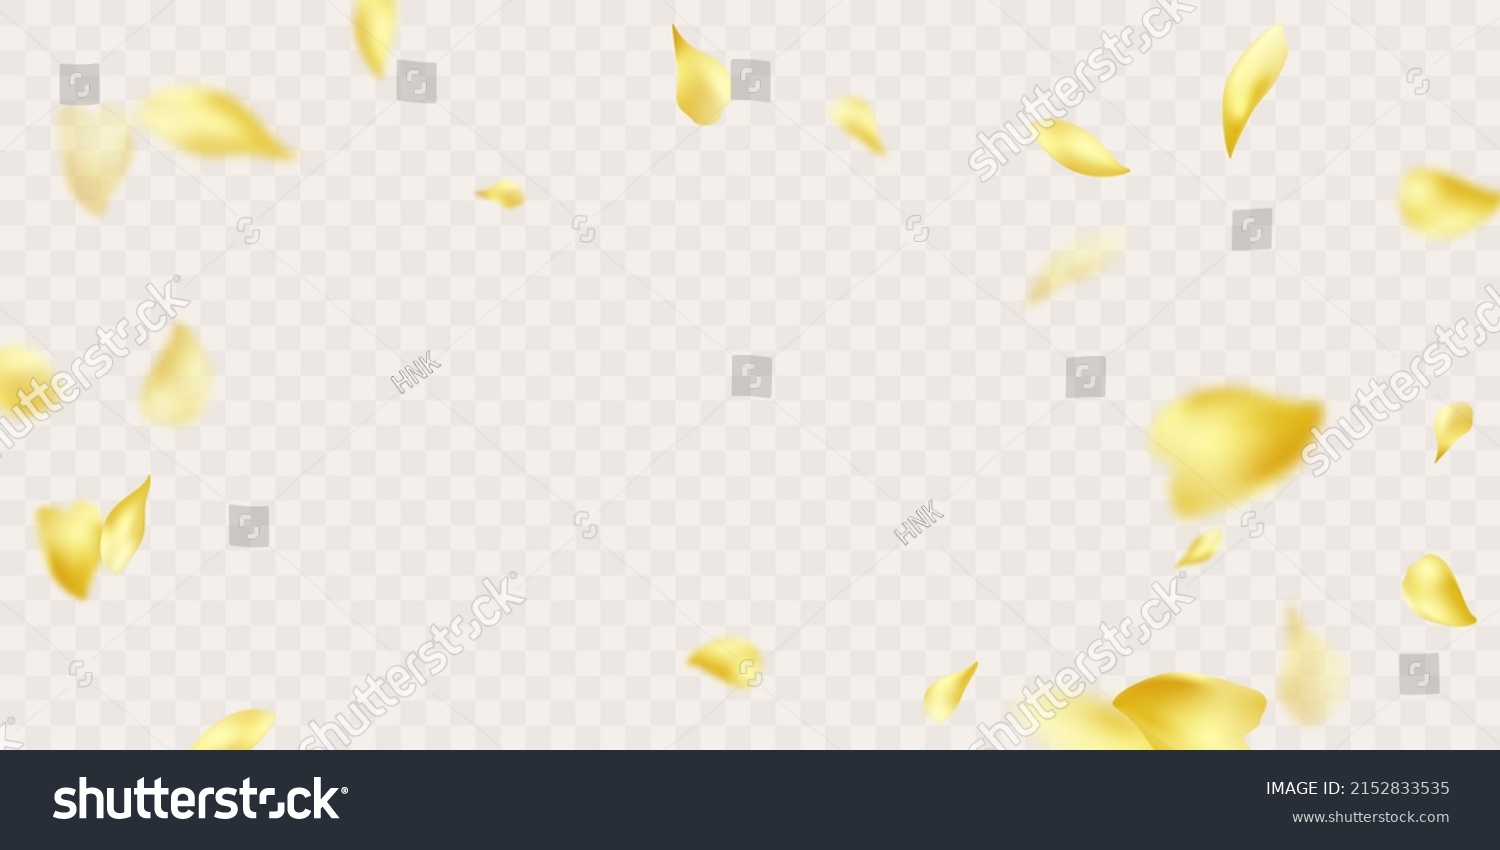 SVG of 3d rendering of falling sunflower petals on a white background svg